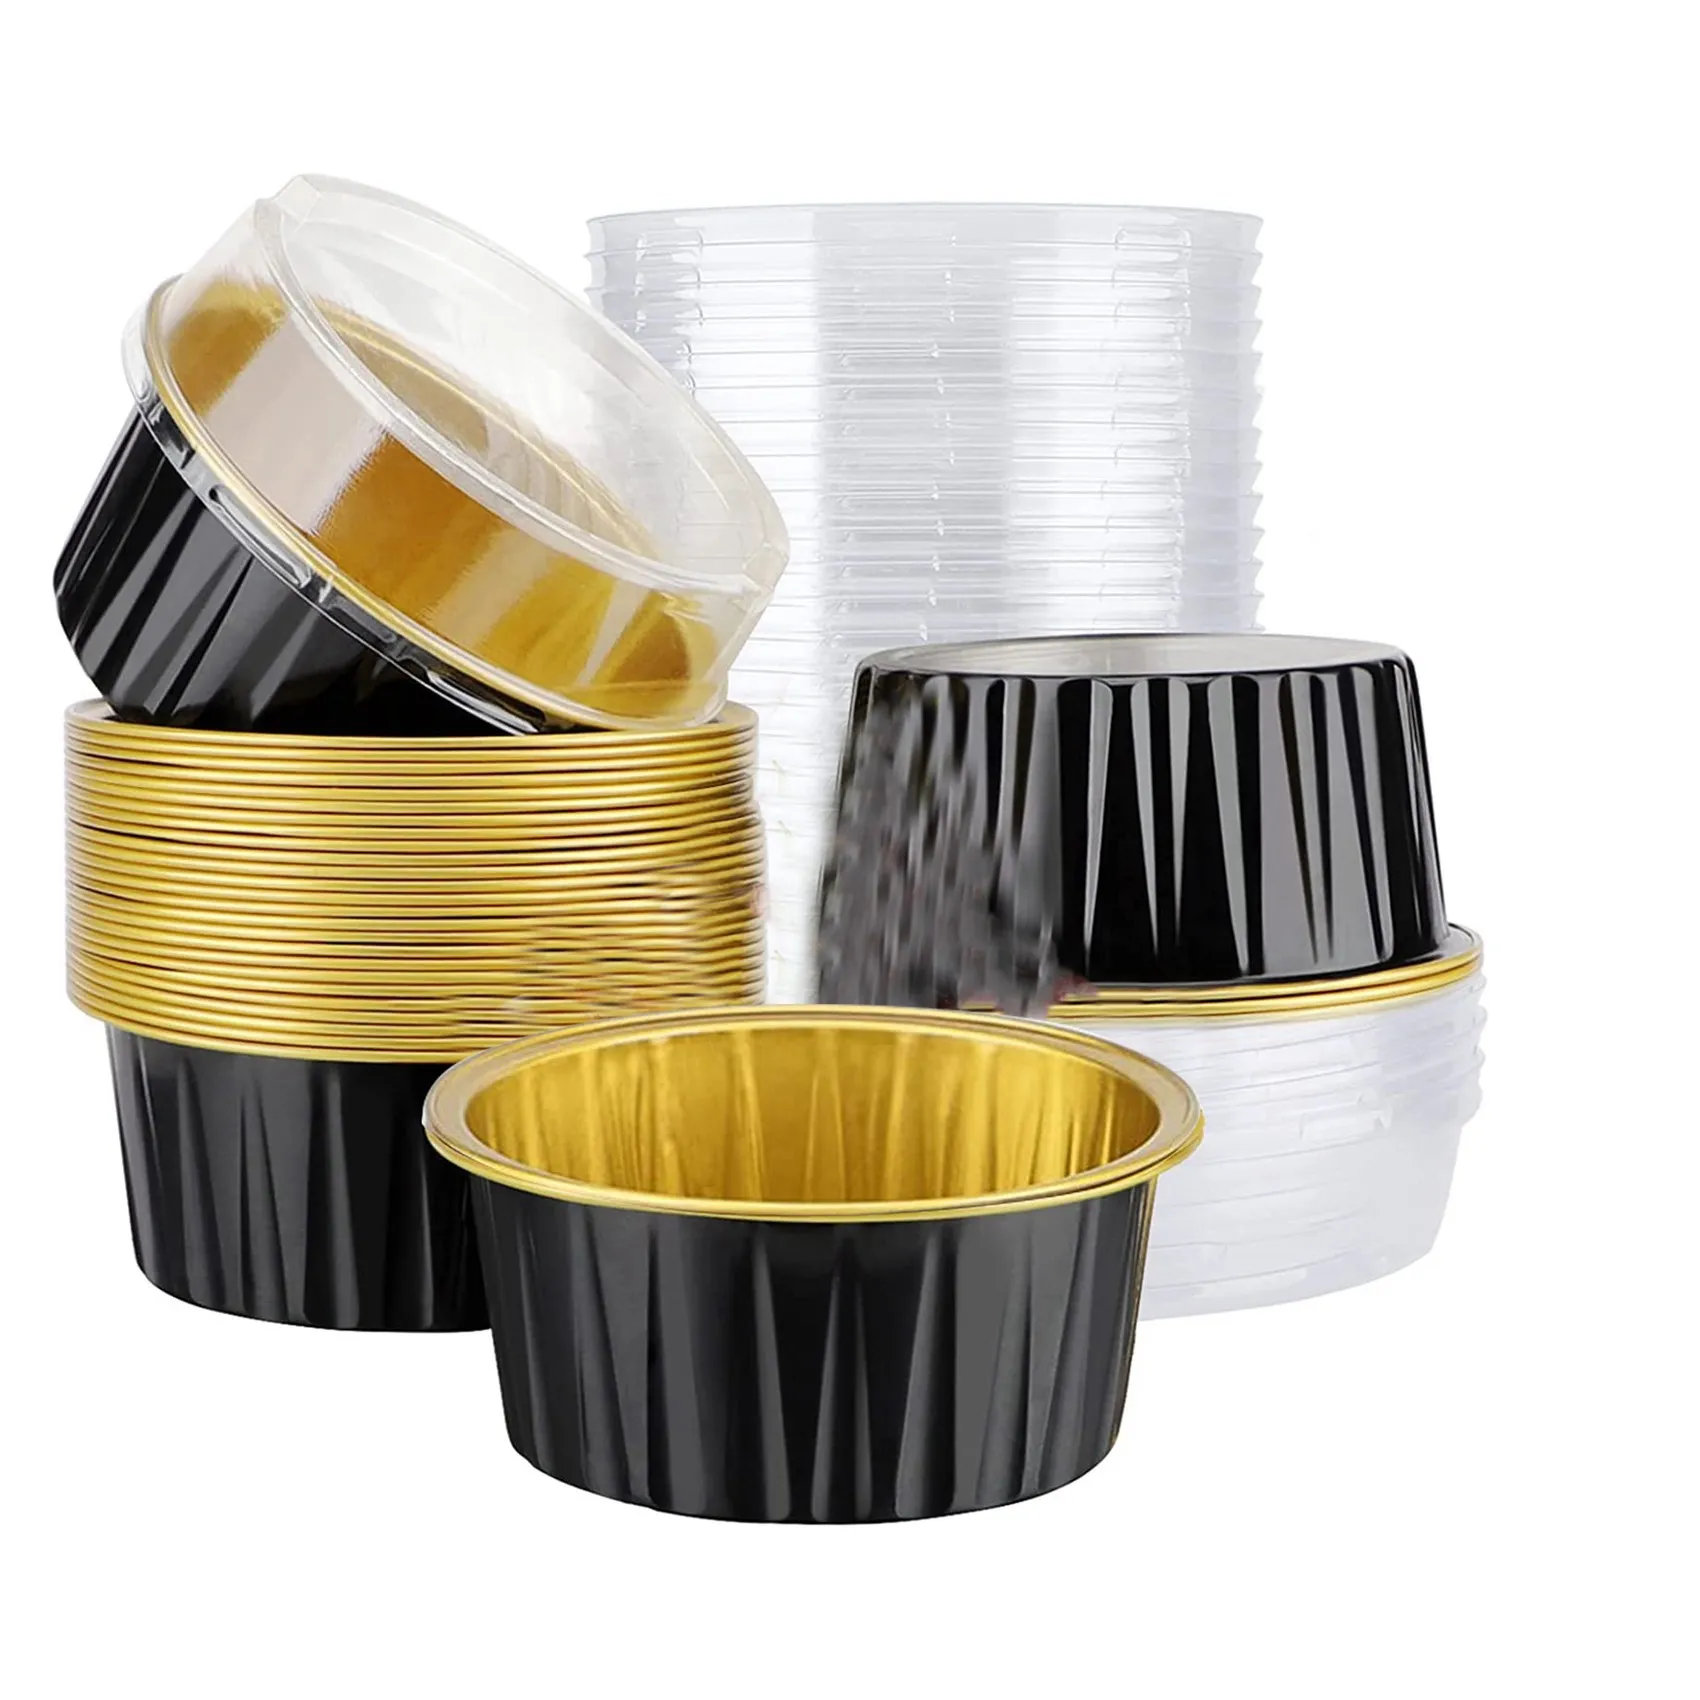 25Pcs Aluminum Foil Cupcake Liners Cups with Lids, 5Oz Disposable Baking Cake Cups for Bakery Wedding Birthday Party(C)